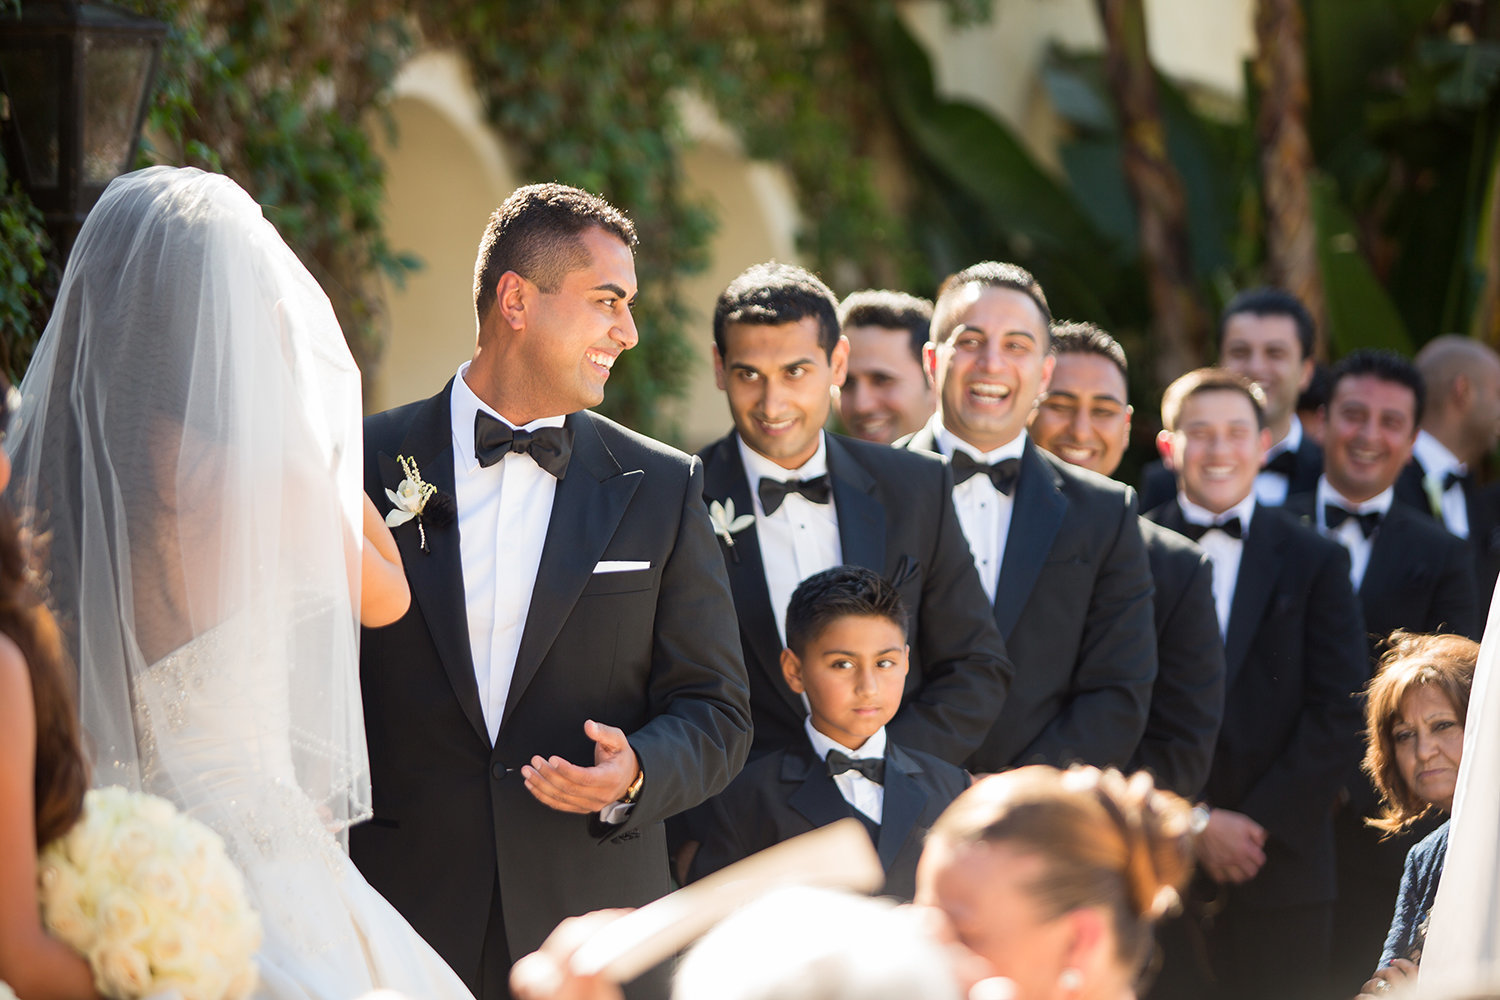 The candid moments are some of our favorites from wedding ceremonies